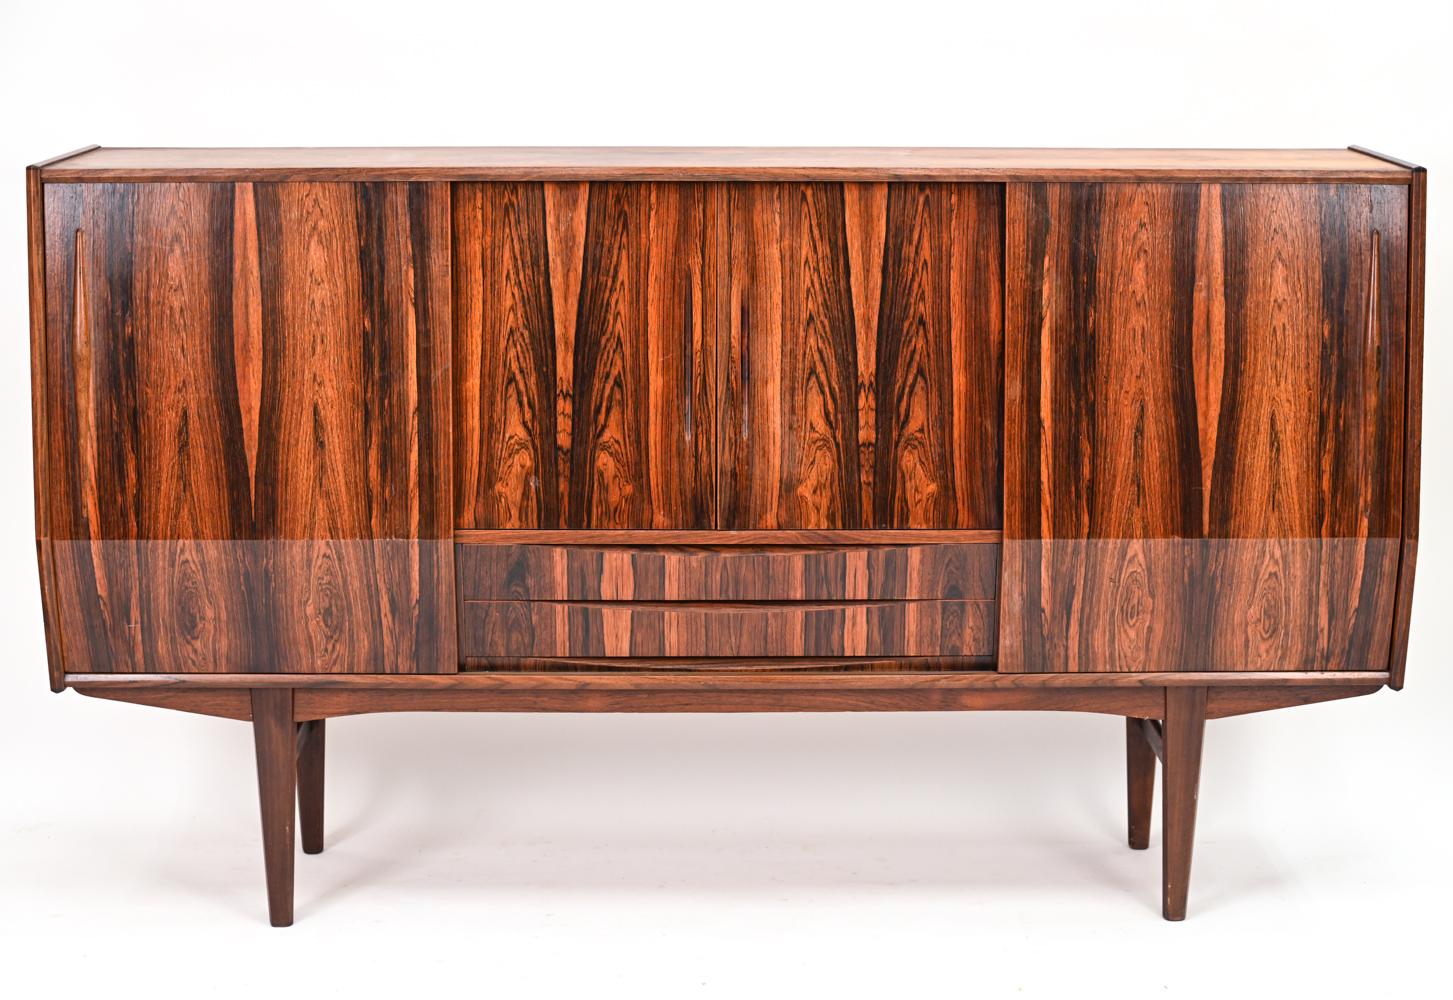 A stunning sculptural Danish mid-century tall bar sideboard or credenza in handsome rosewood veneer, featuring a geometric angled front on tapering legs. Sliding cabinet doors that open to reveal ample shelving flank a central bar cabinet with an